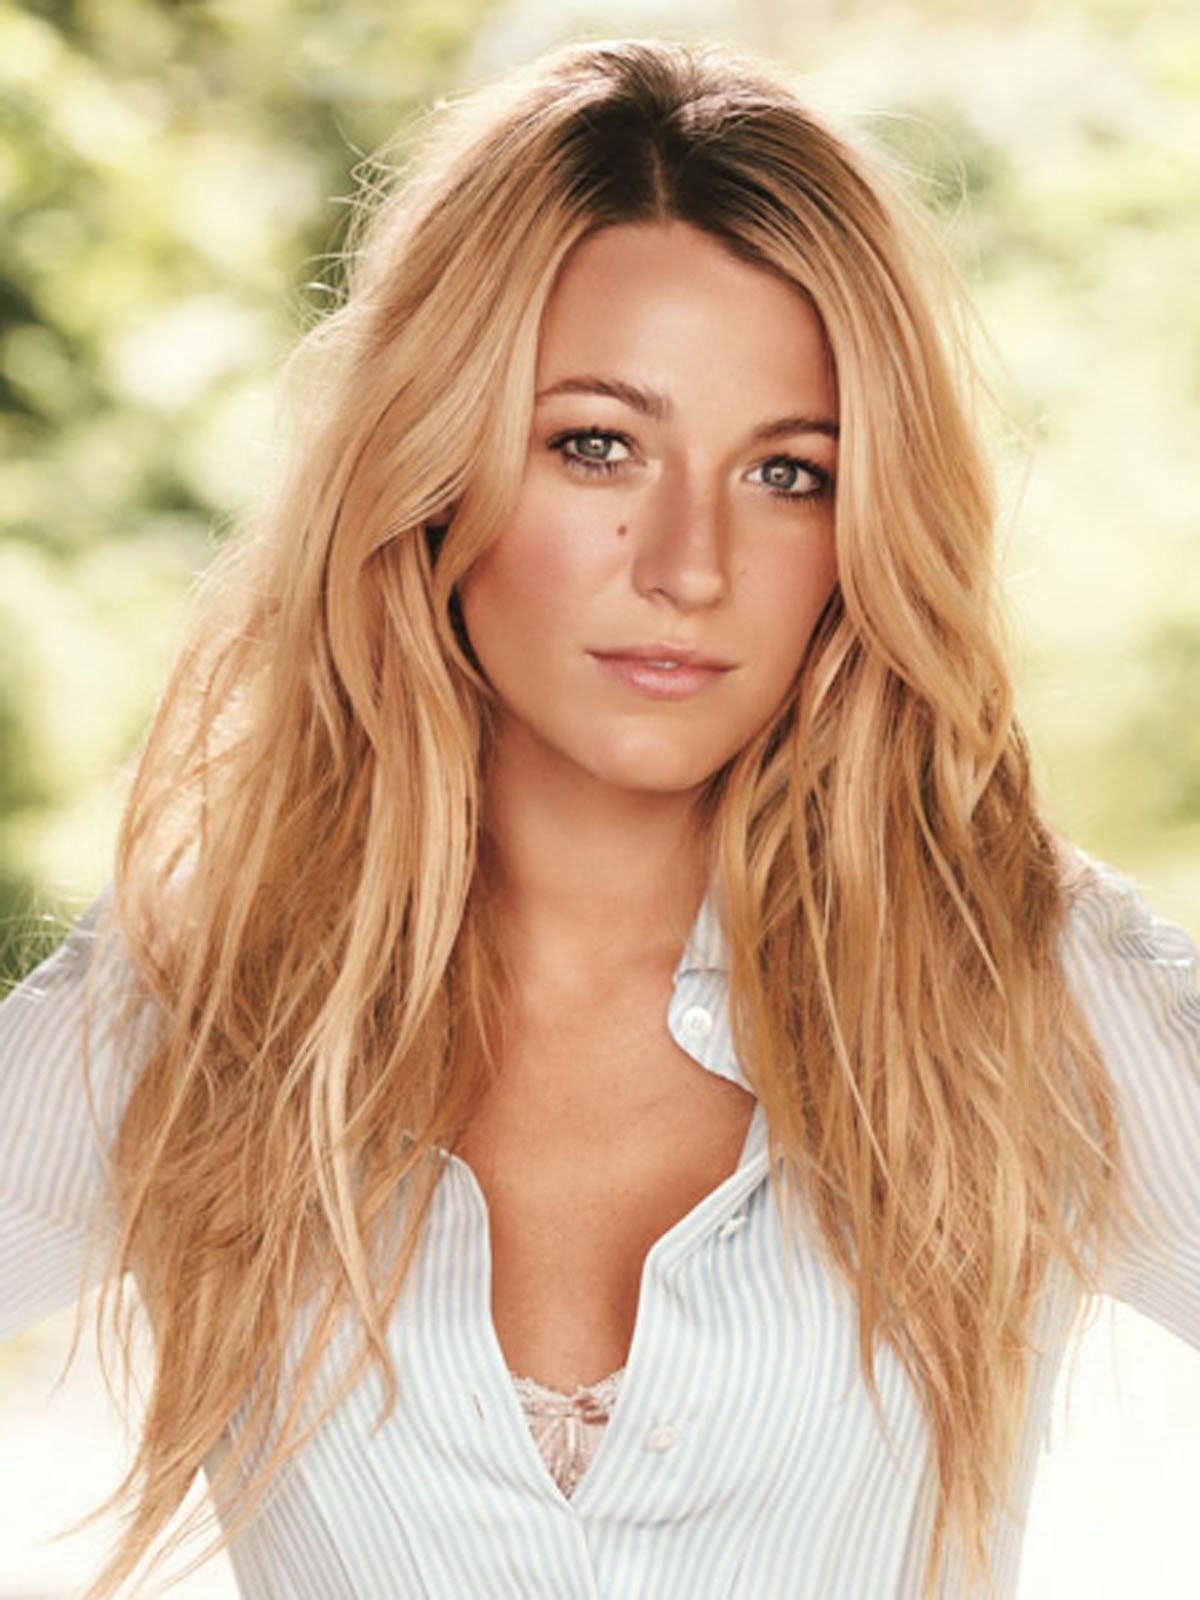 ACTRESS WALLPAPERS: Blake Lively Hair Style Photos